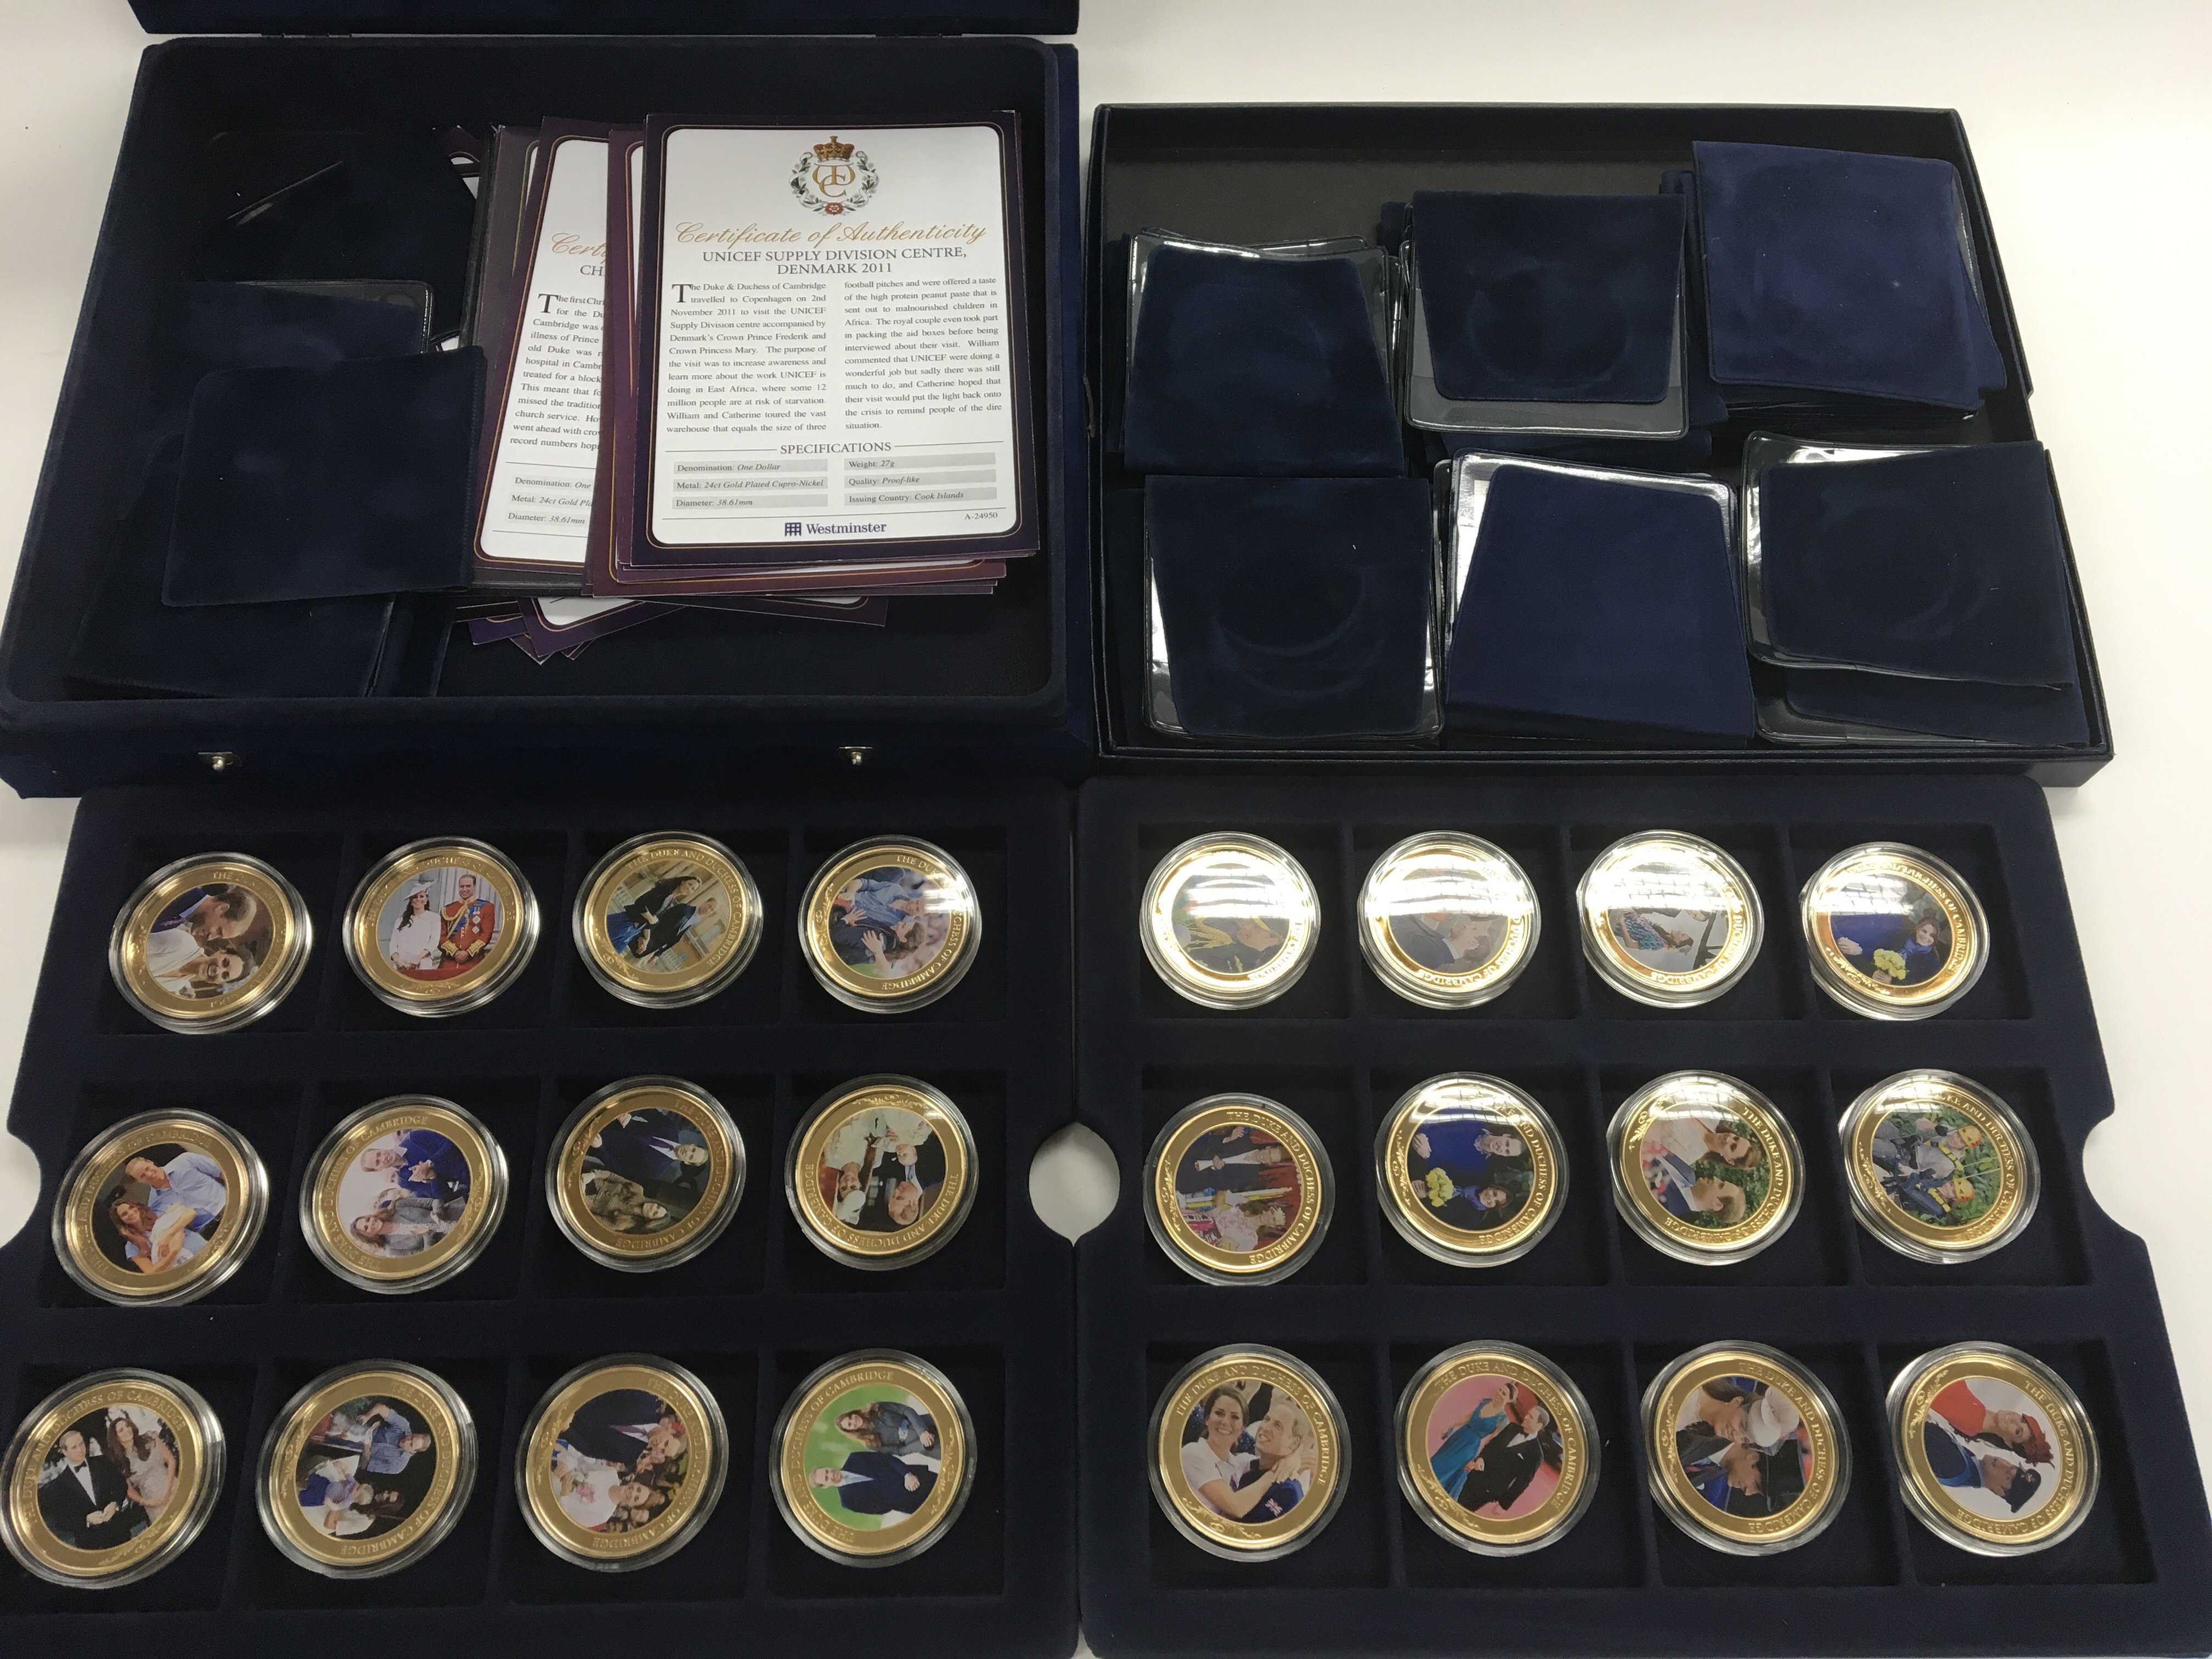 A cased set of William & Kate Westminster coins.